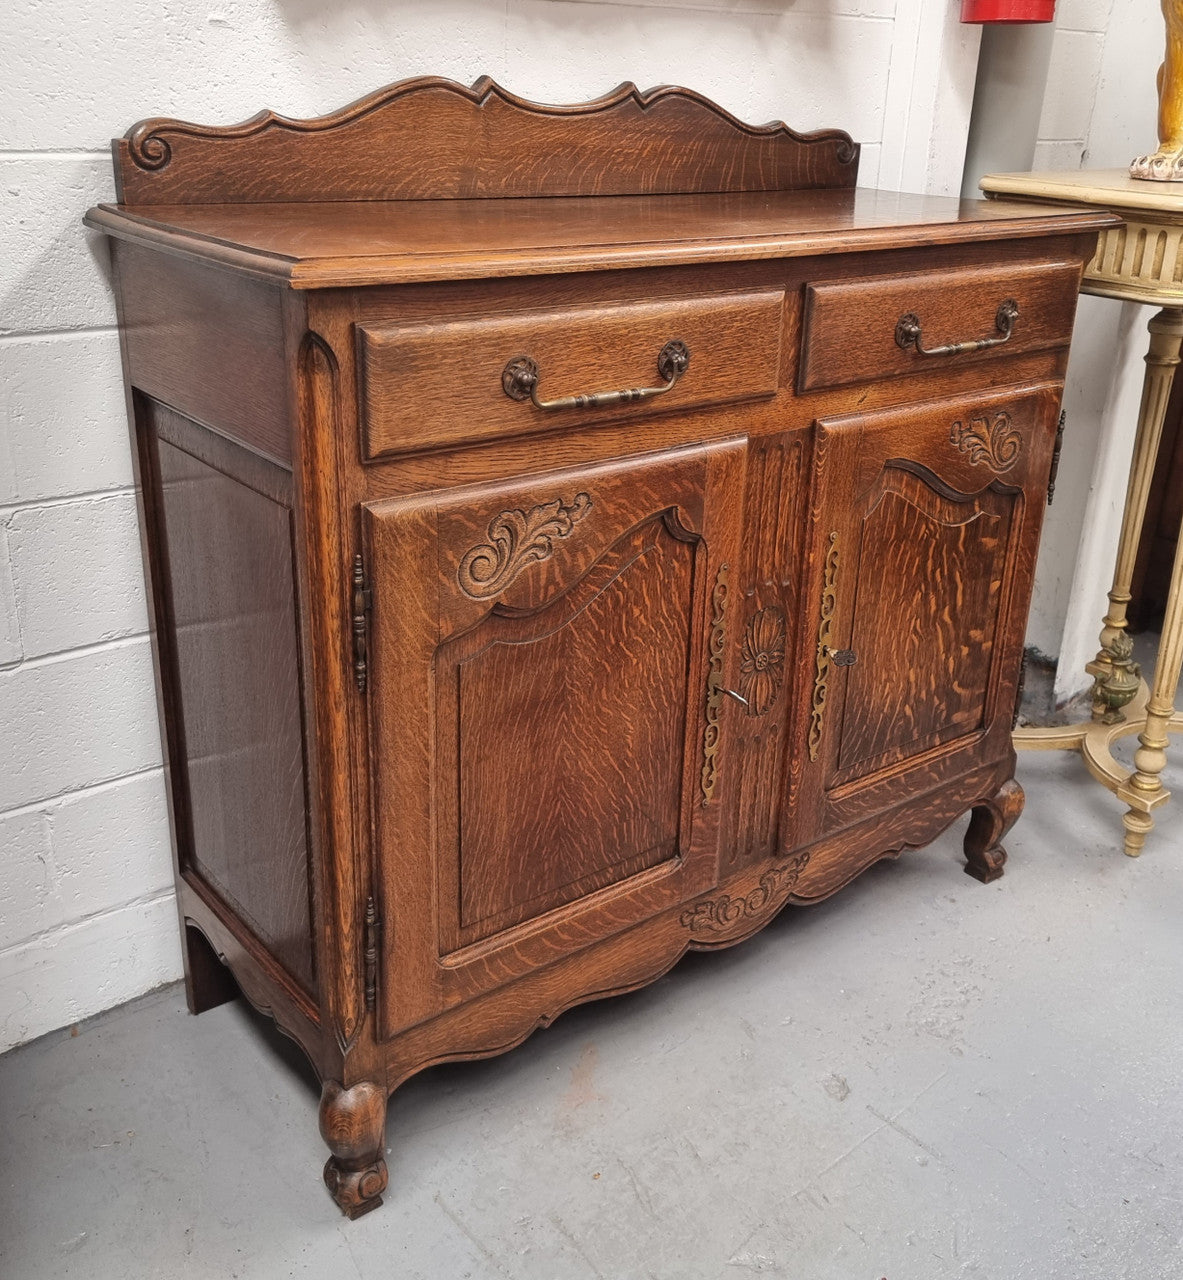 French Louis XV style Oak two door, two drawer sideboard. It is of pleasing narrow proportions and has one interior shelf. It has been sourced from France and it is in good original detailed condition.